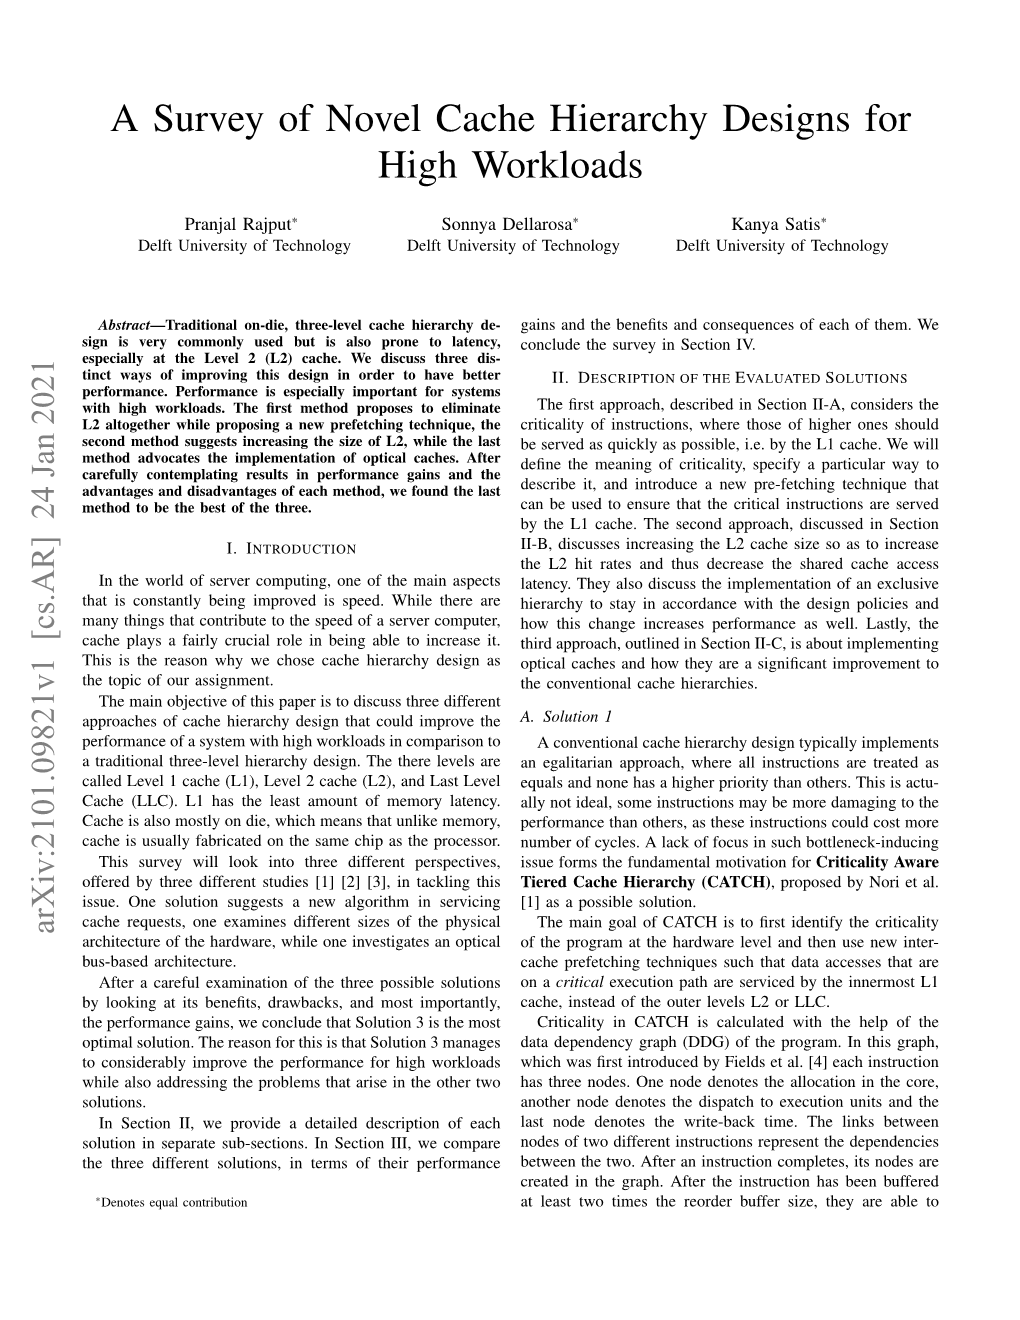 A Survey of Novel Cache Hierarchy Designs for High Workloads